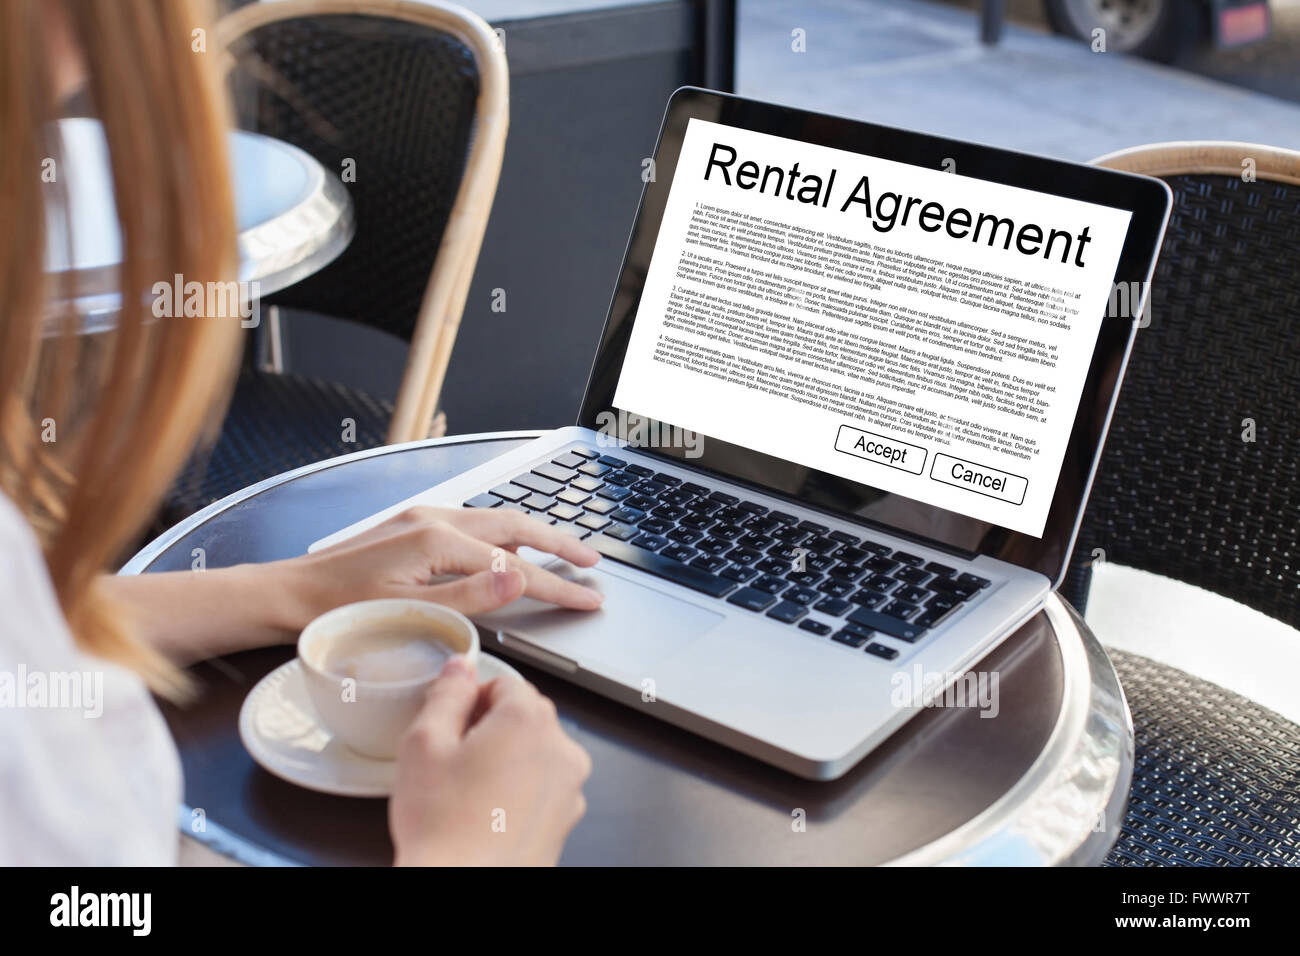 rental agreement, rent a car or house, woman reading tenancy contract on the screen of laptop Stock Photo